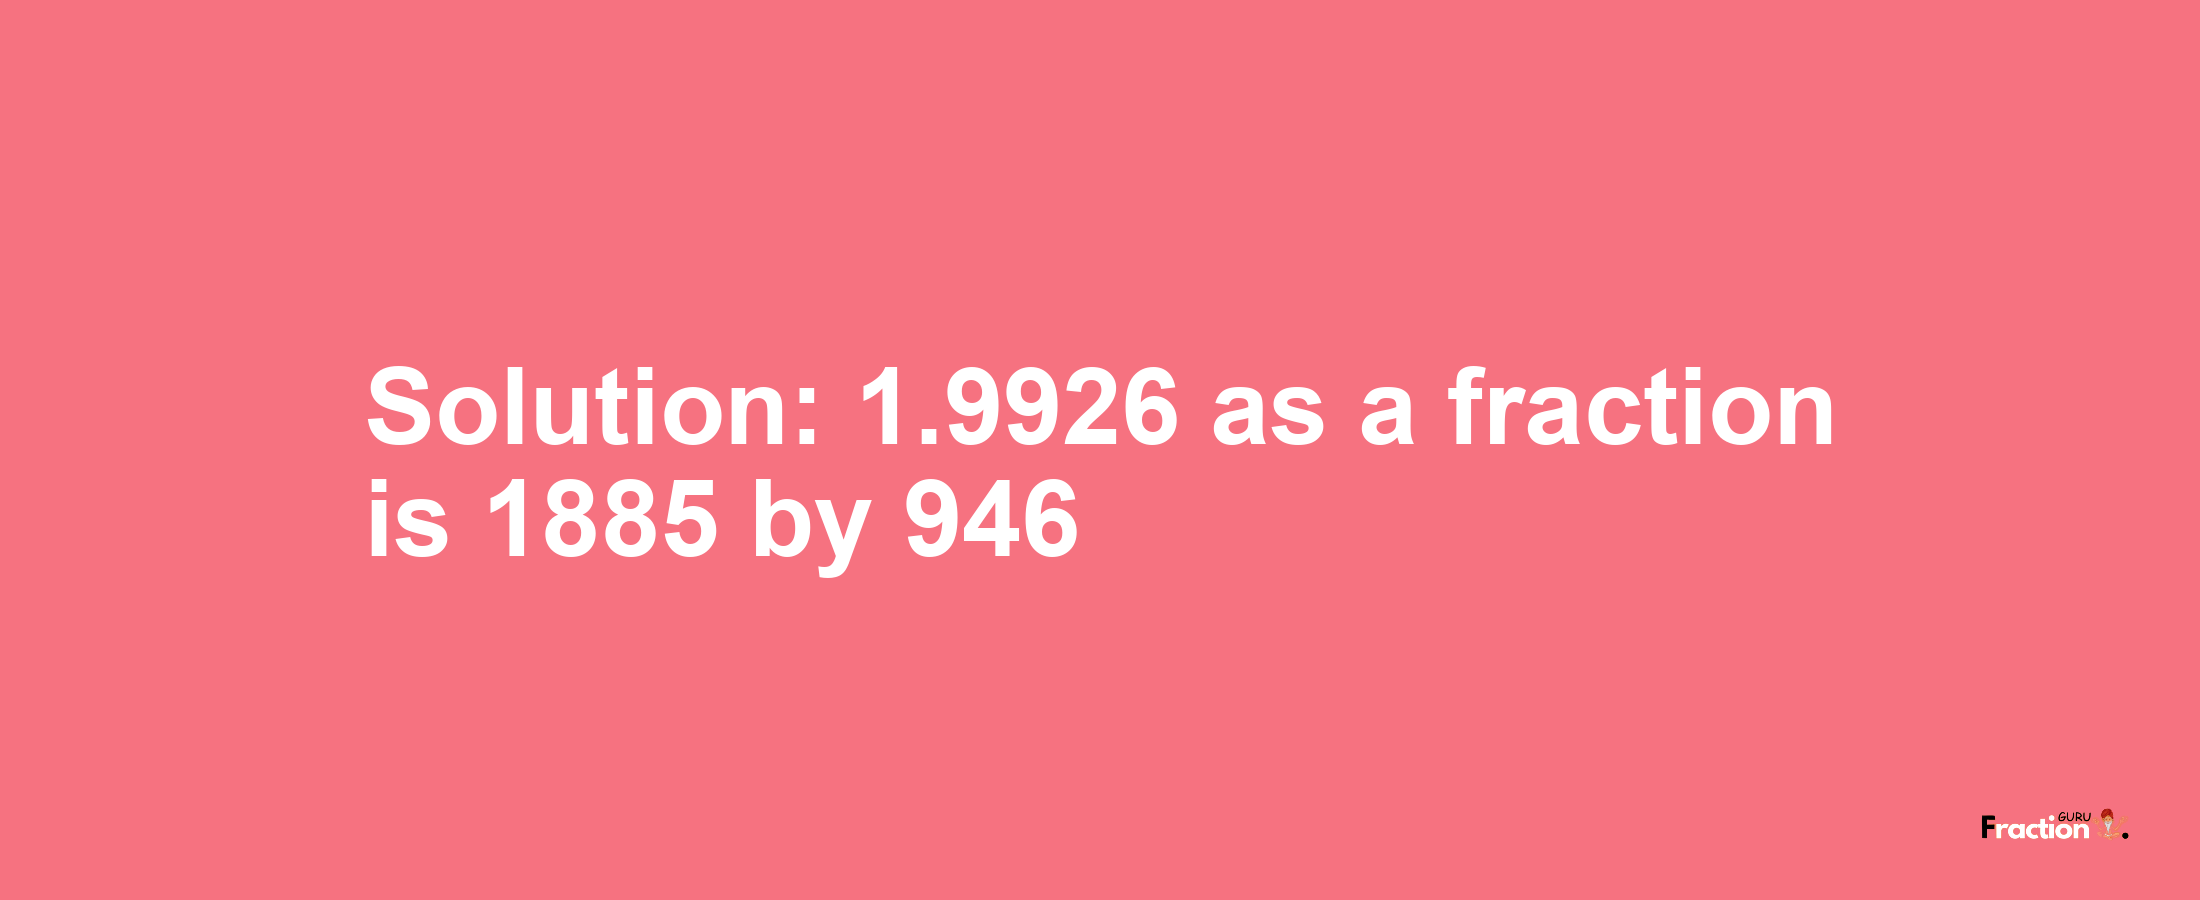 Solution:1.9926 as a fraction is 1885/946